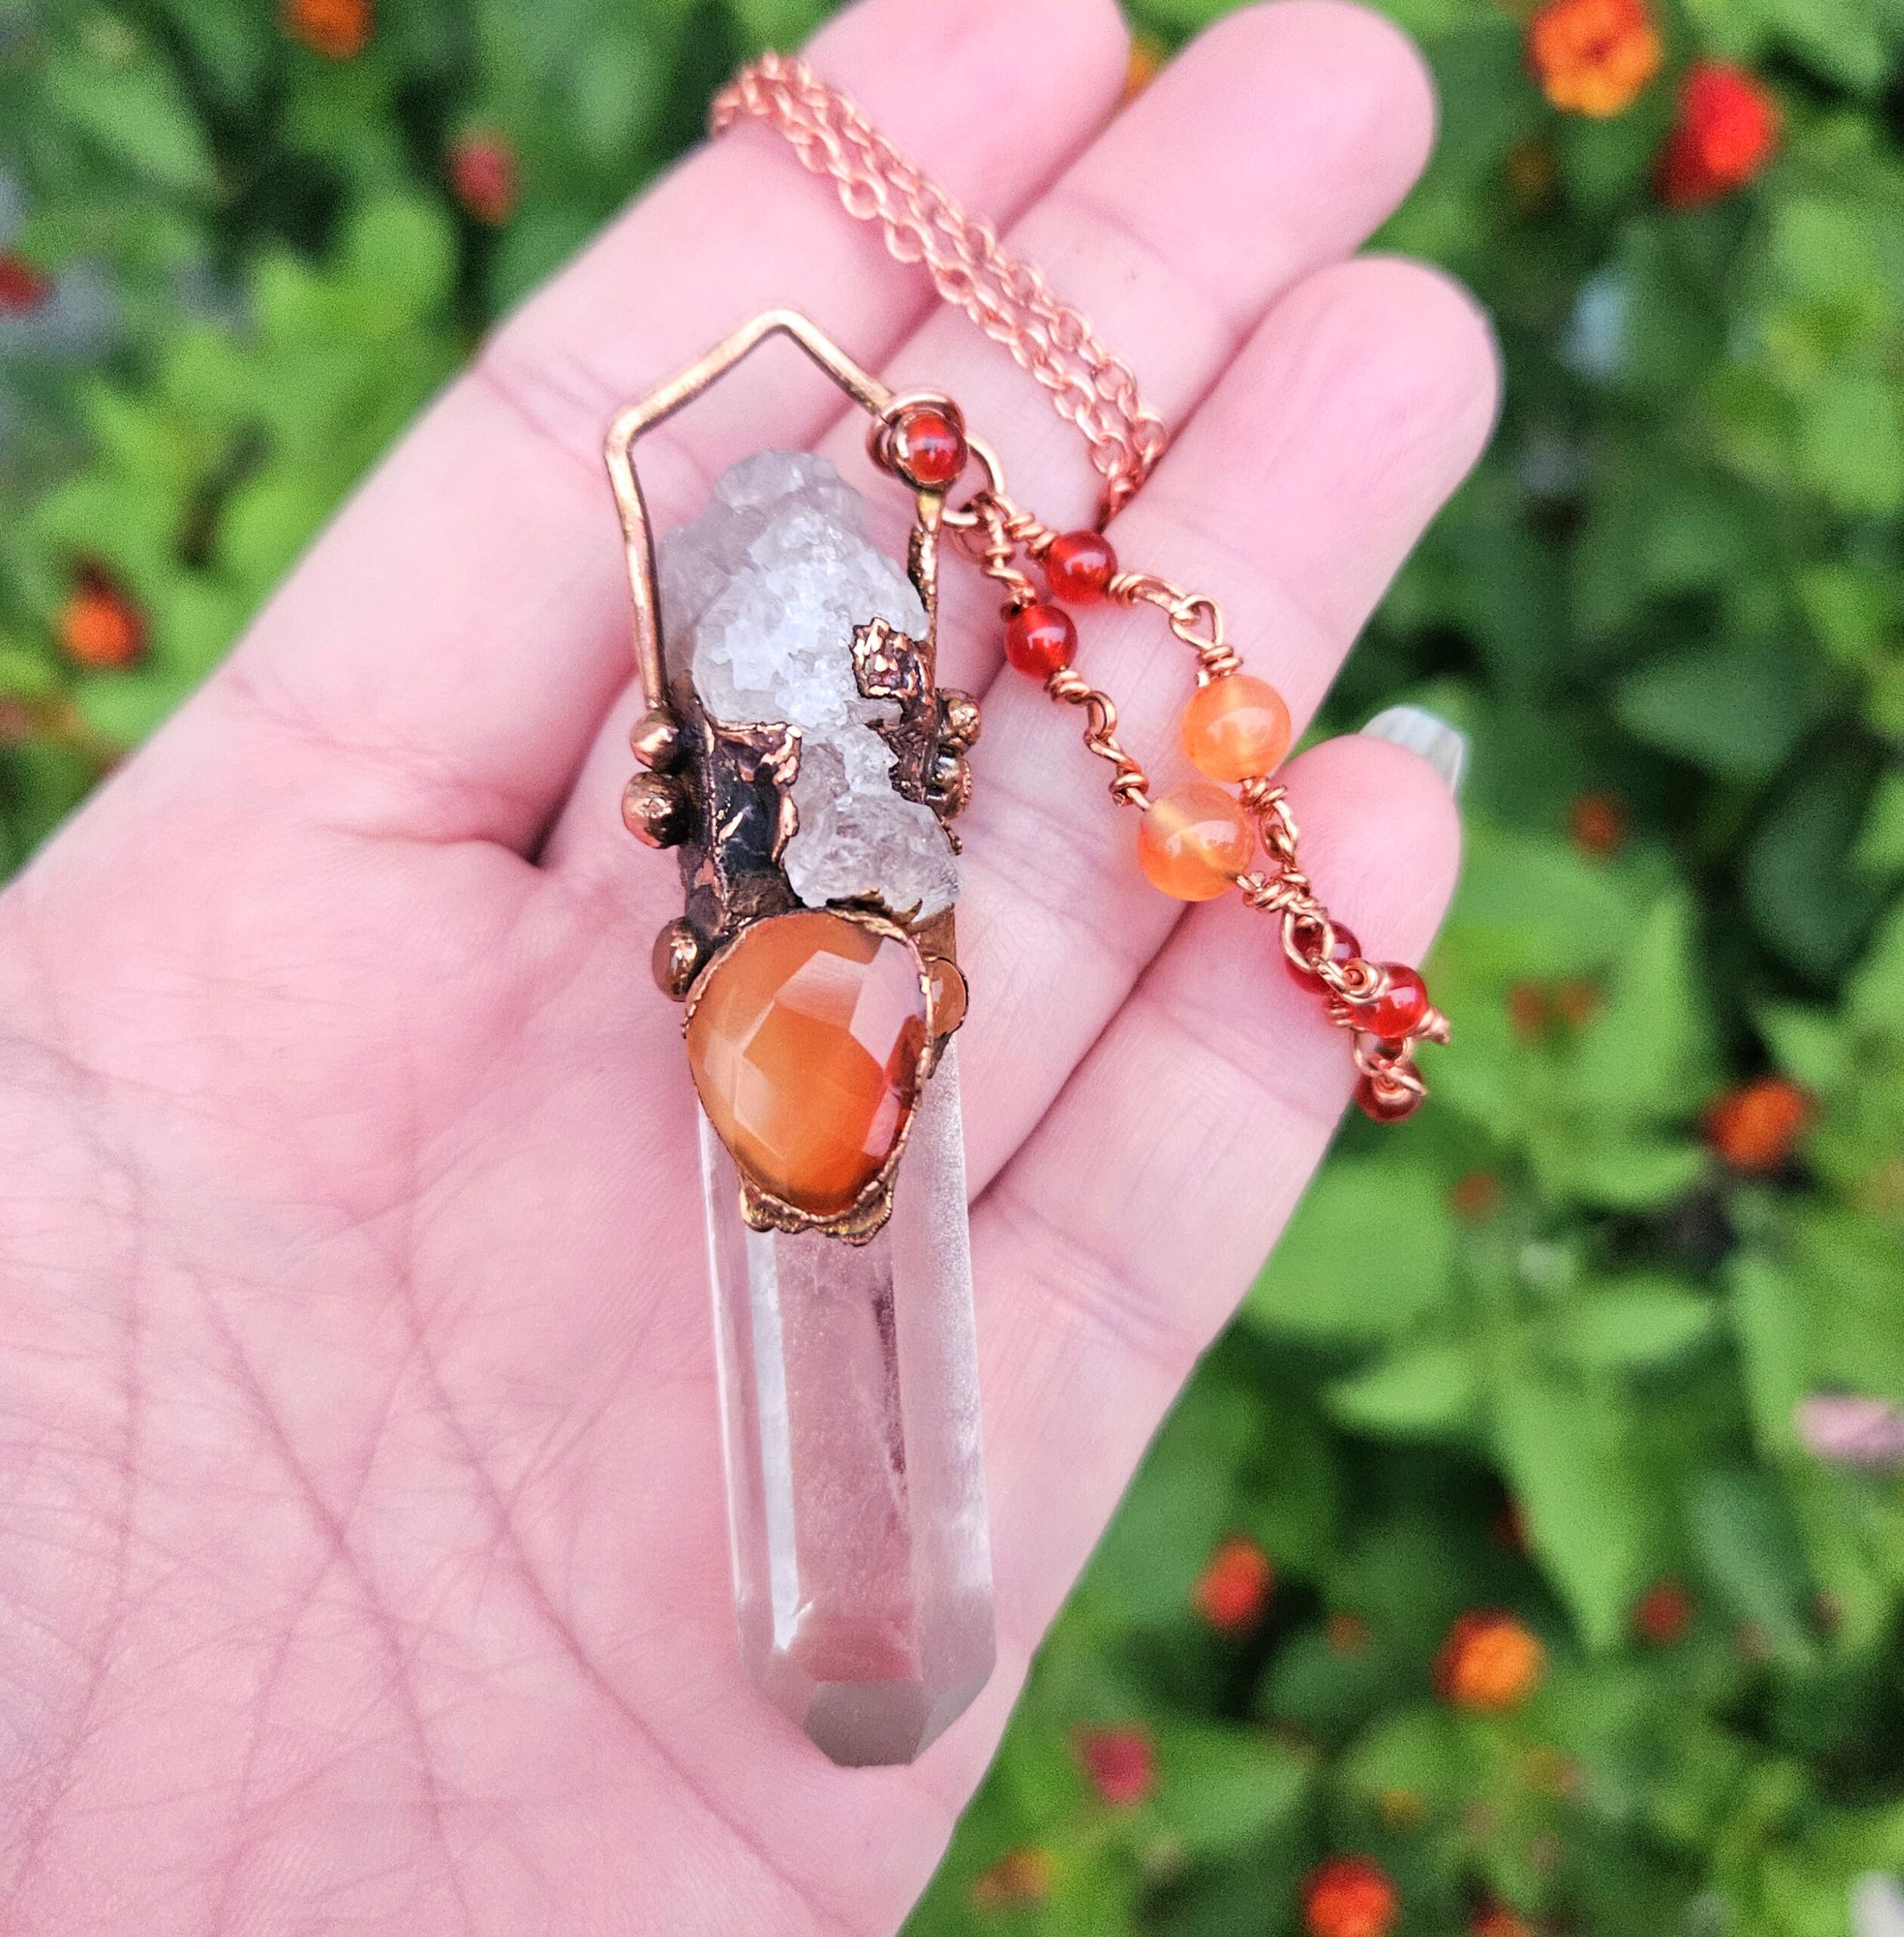 Amazon.com: Raw Crystal Necklace, Carnelian Rough Stone Necklace, Dainty Stone  Pendant, Healing Crystals Healing Stone Pendant for Beauty, Love and  Positive Energy Spiritual Crystal Jewelry Gift : Handmade Products